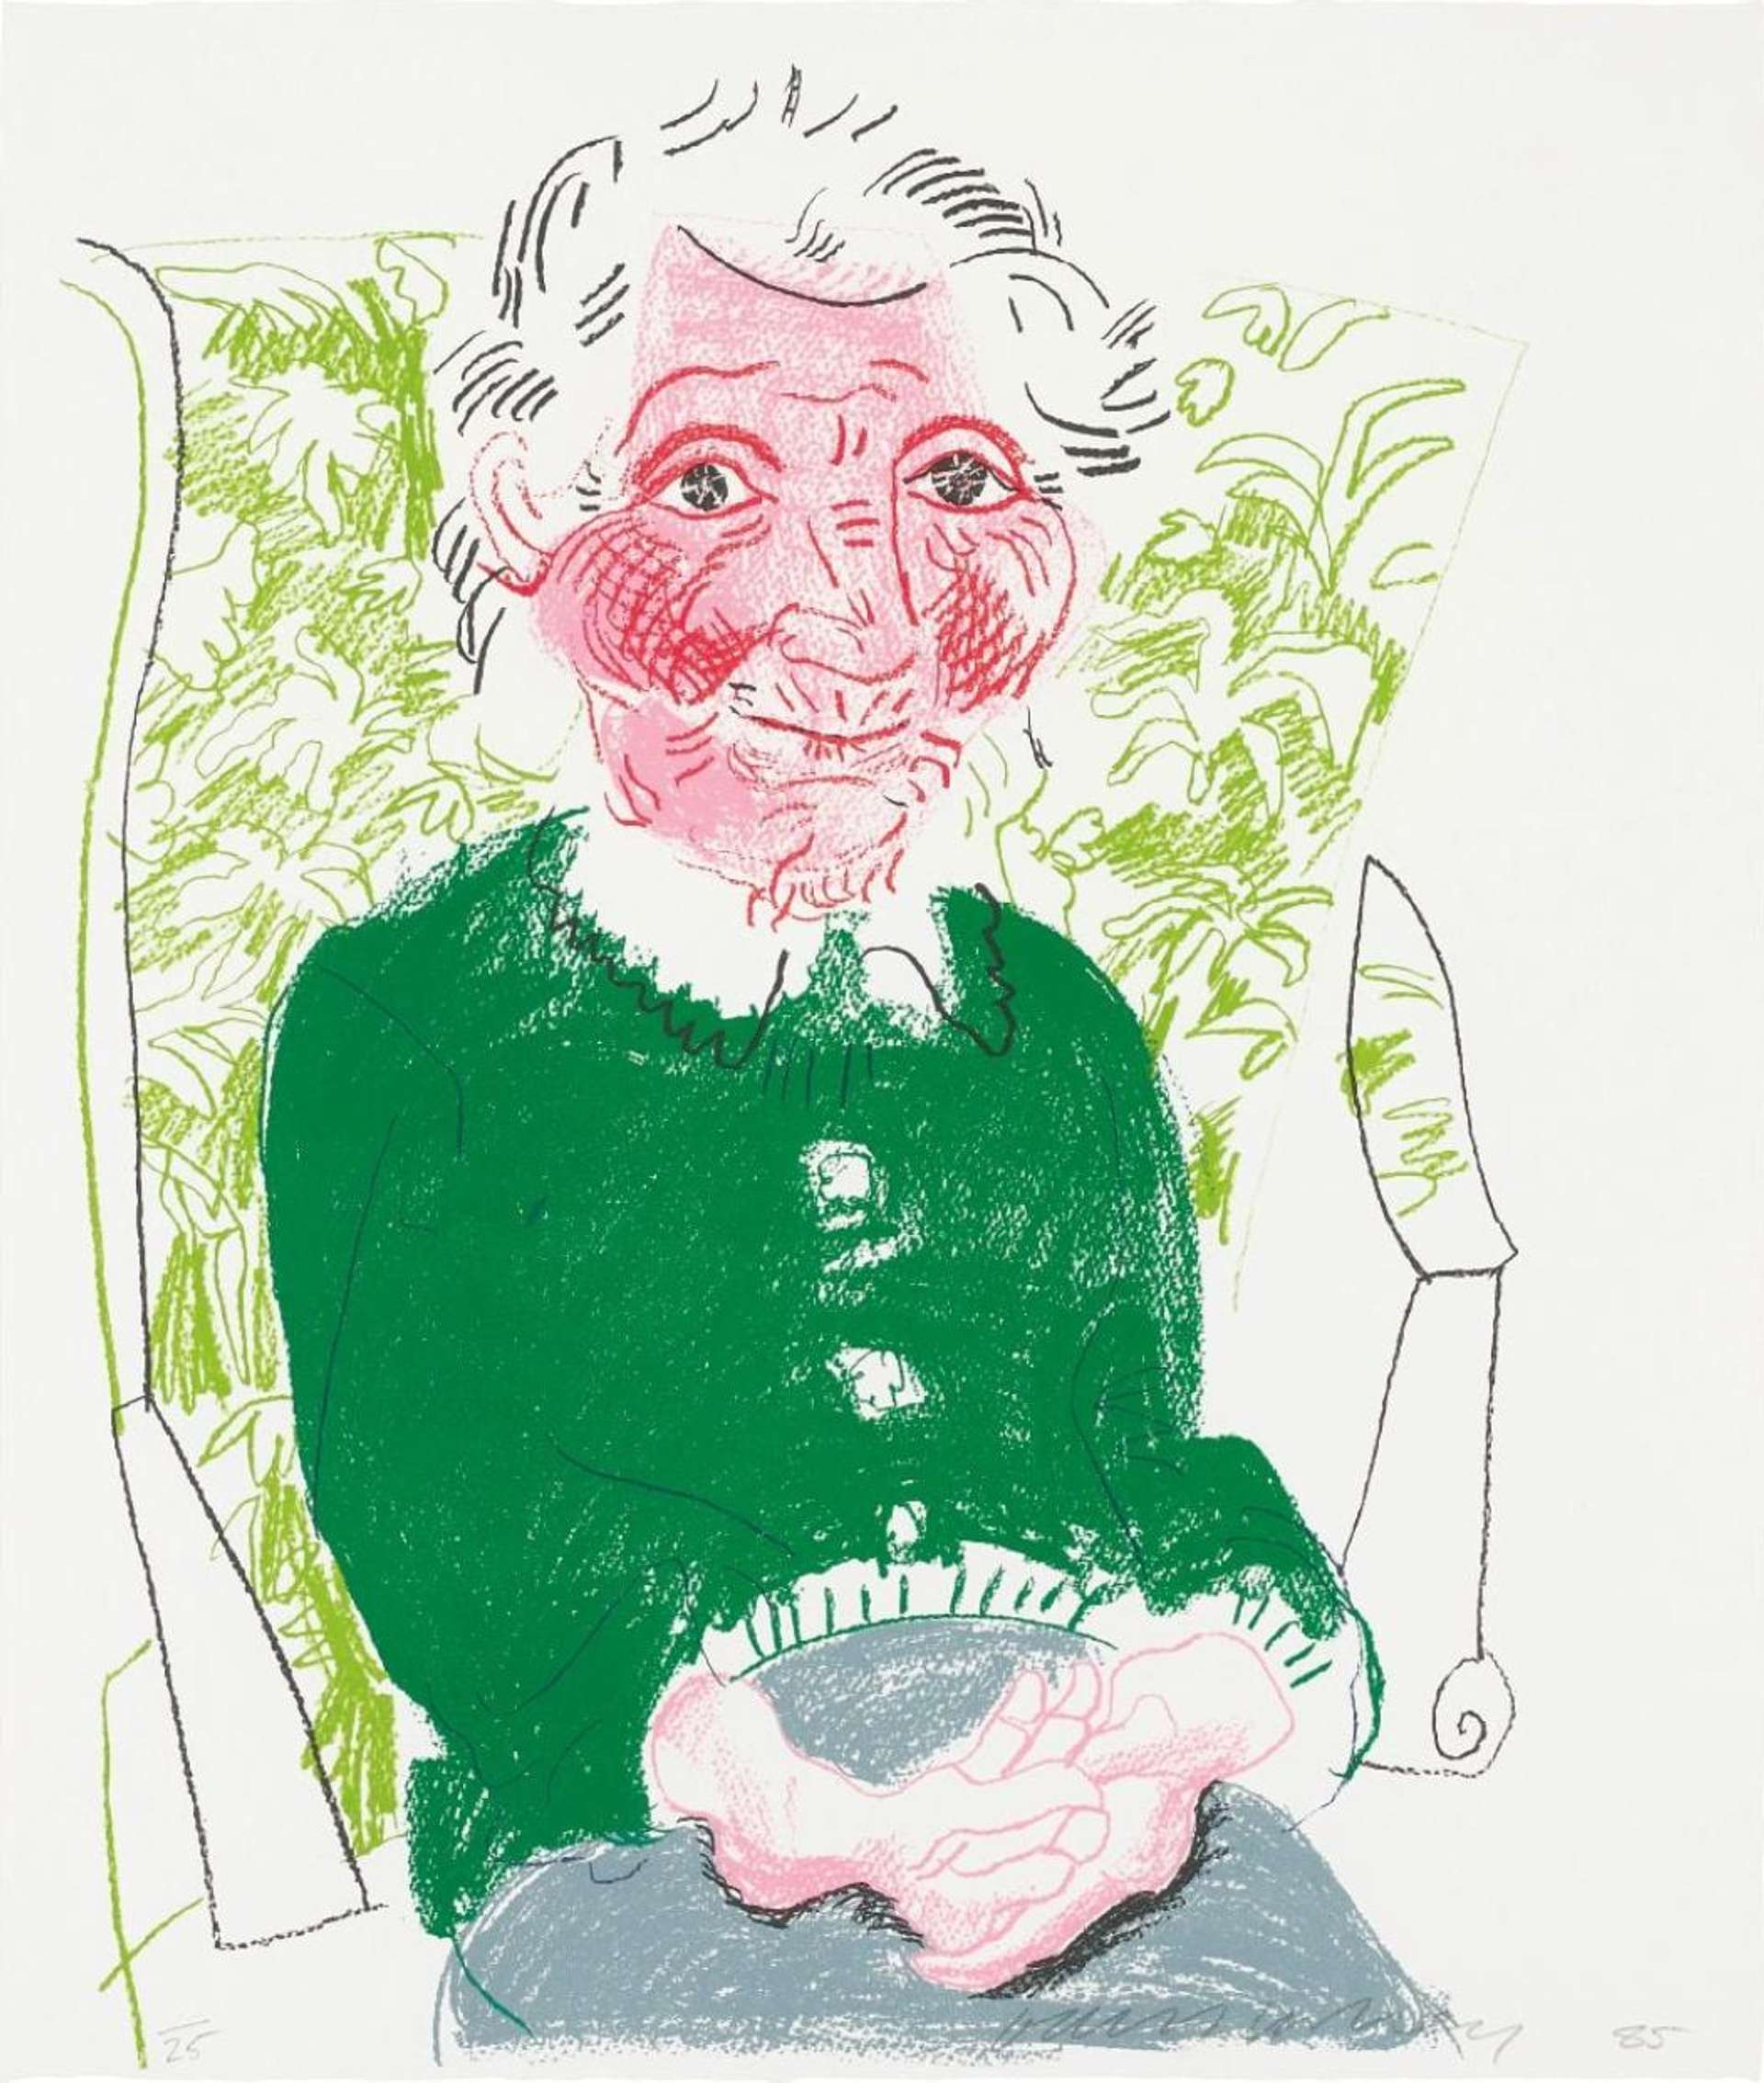 David Hockney’s Portrait Of Mother I. A lithographic print of an aged woman seated in a green chair, dressed in a green sweater with flushed, red cheeks.